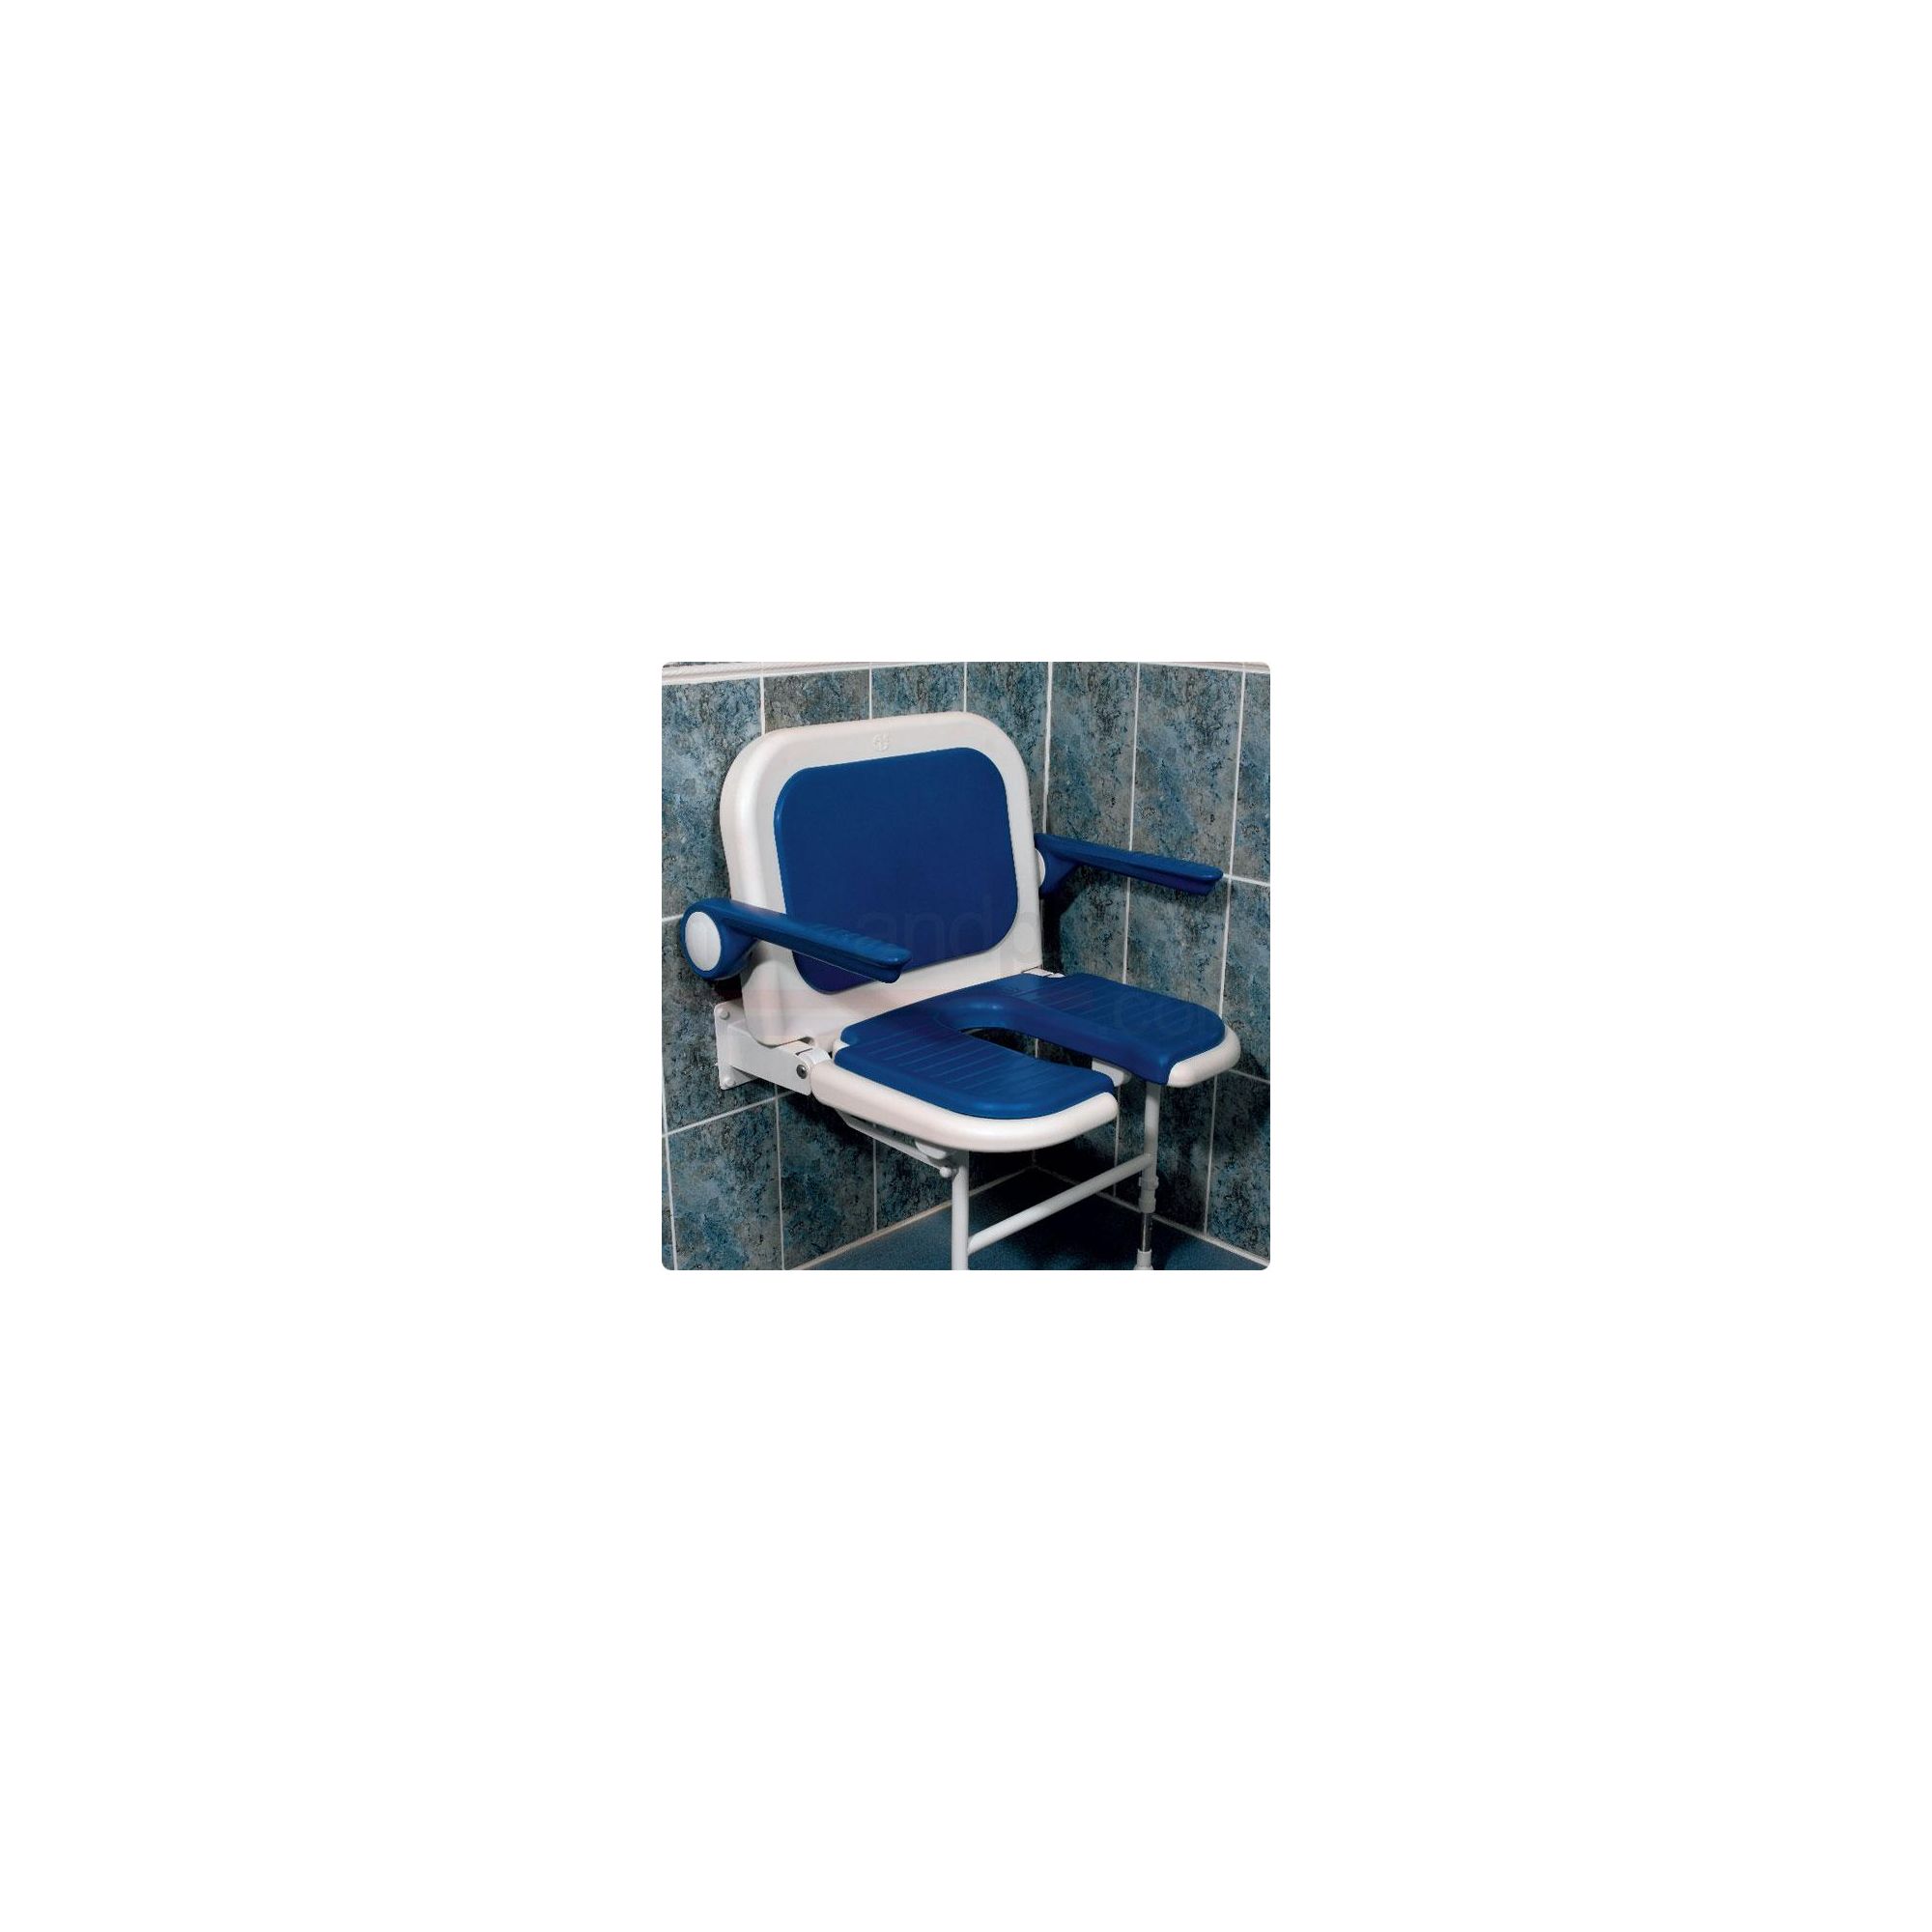 AKW 4000 Series Extra Wide Fold Up Horseshoe Shower Seat Blue with Back and Blue Arms at Tesco Direct